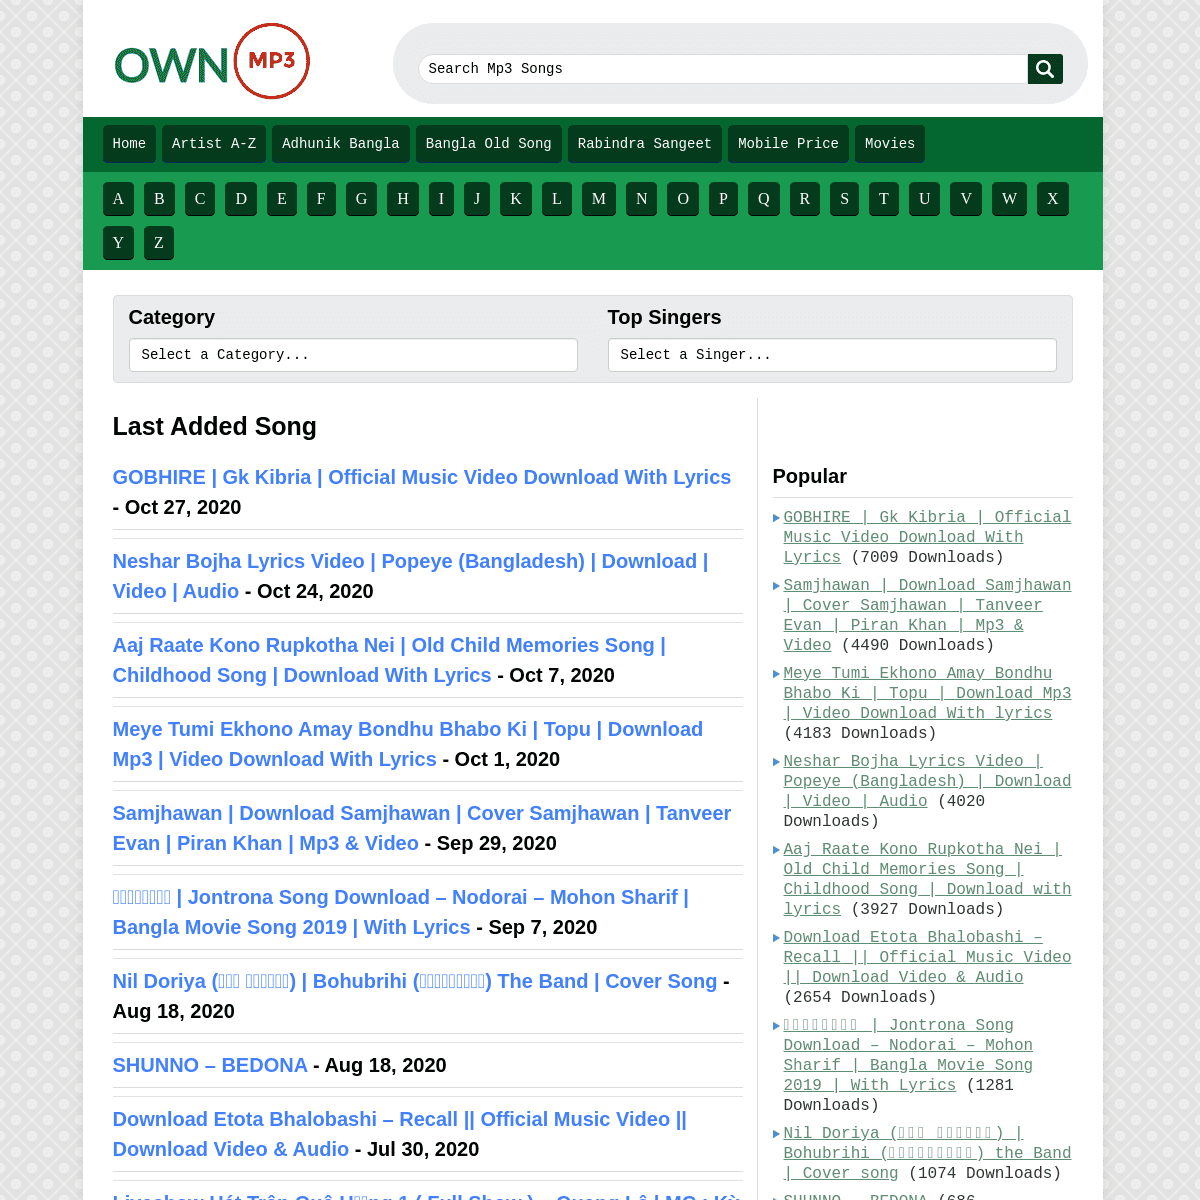 A complete backup of https://ownmp3.com